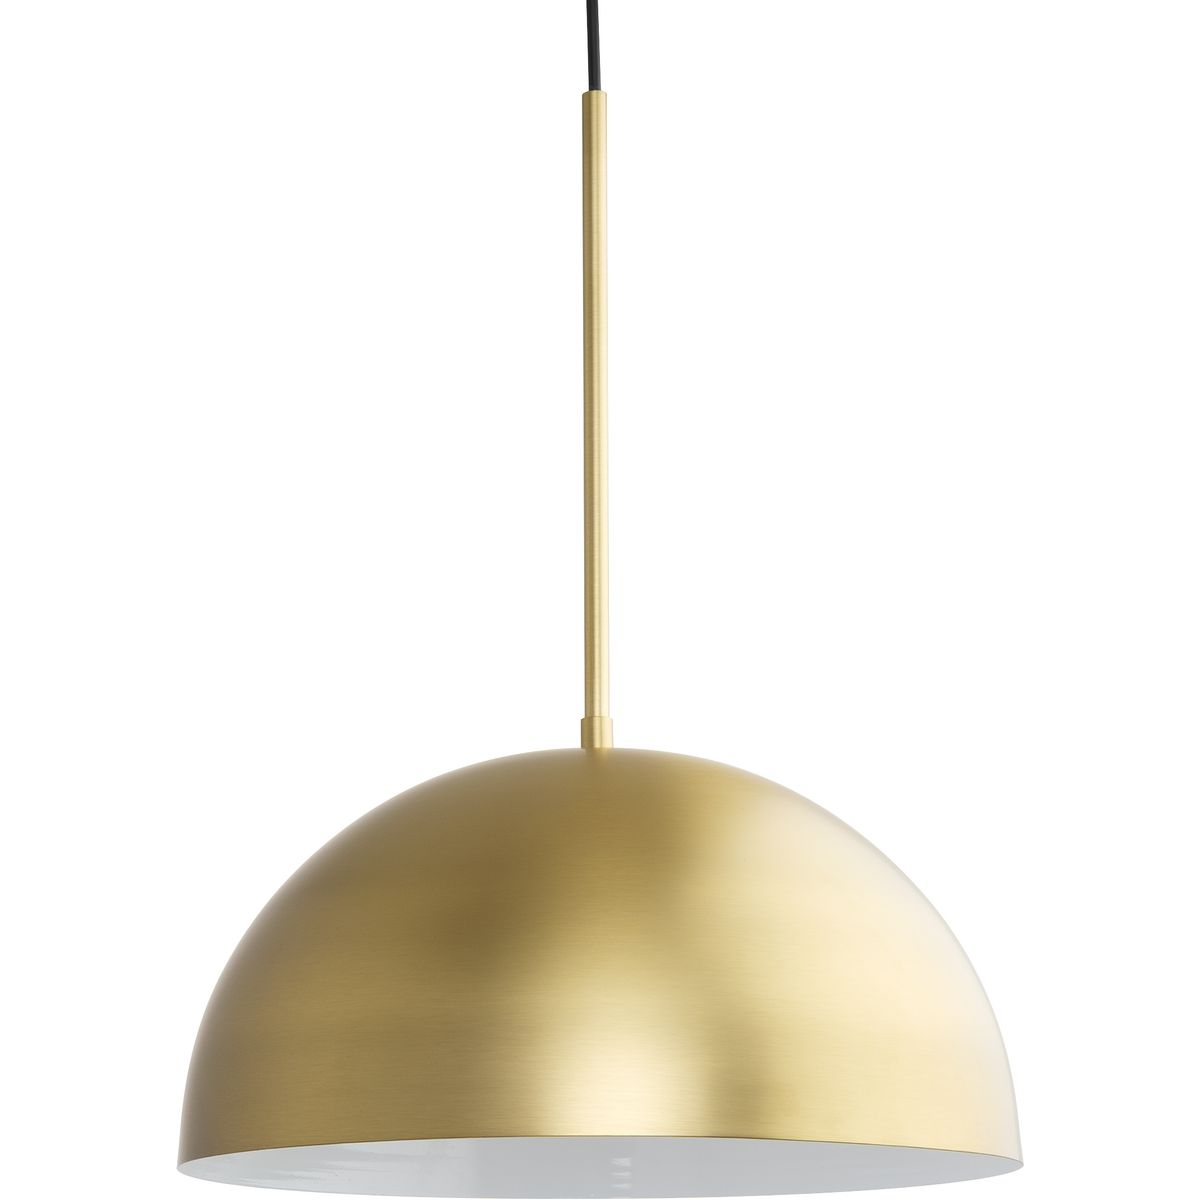 PROGRESS LIGHTING P500379-191 Brushed Gold Perimeter Collection One-Light Brushed Gold Mid-Century Modern Pendant with metal Shade